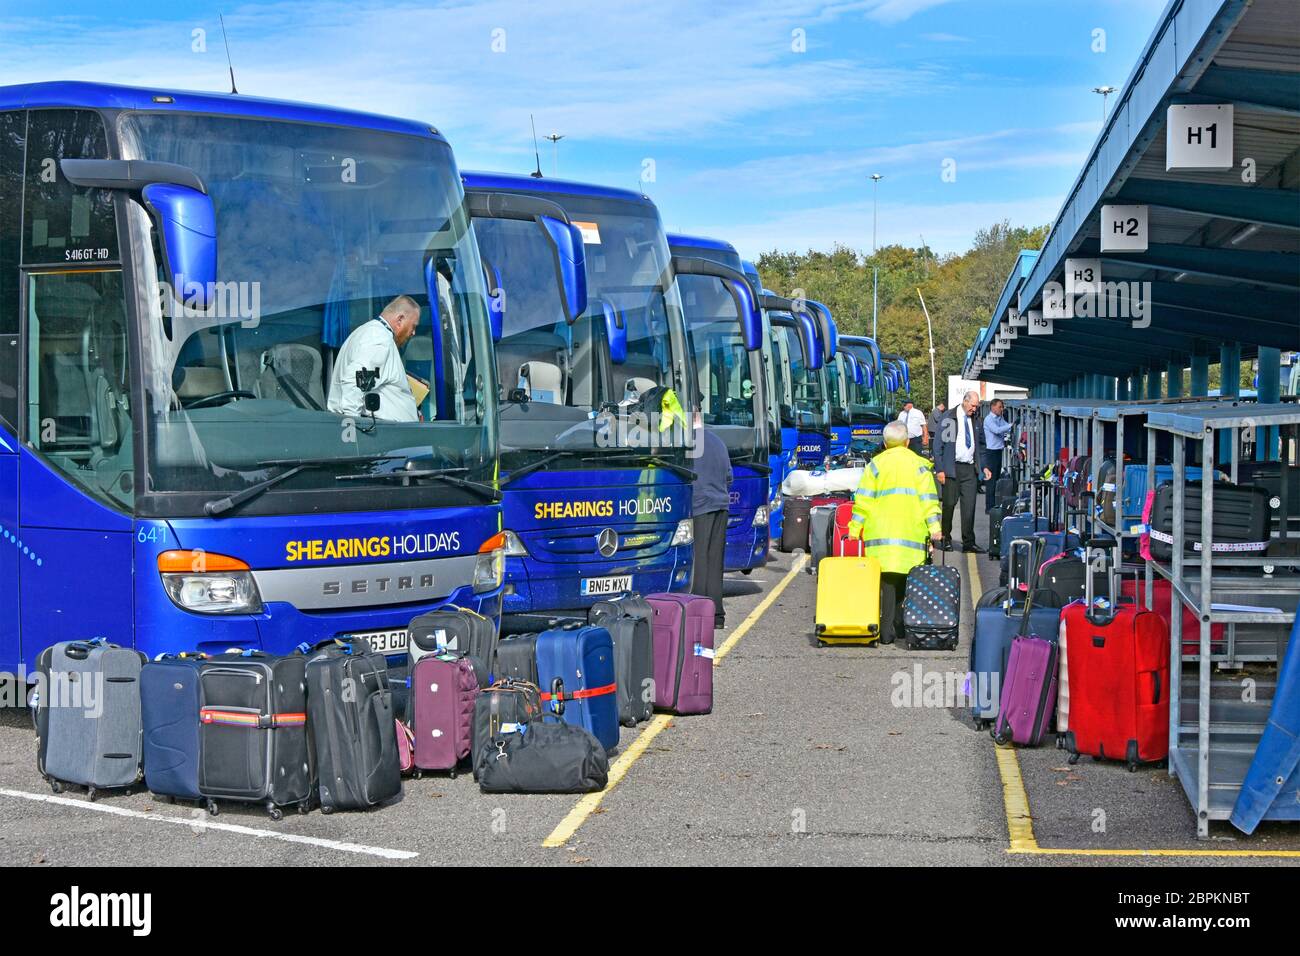 Outdoor luggage logistics hub for sorting & loading passengers holiday tour suitcases onto Shearings coaches Scratchwood Services London England UK Stock Photo